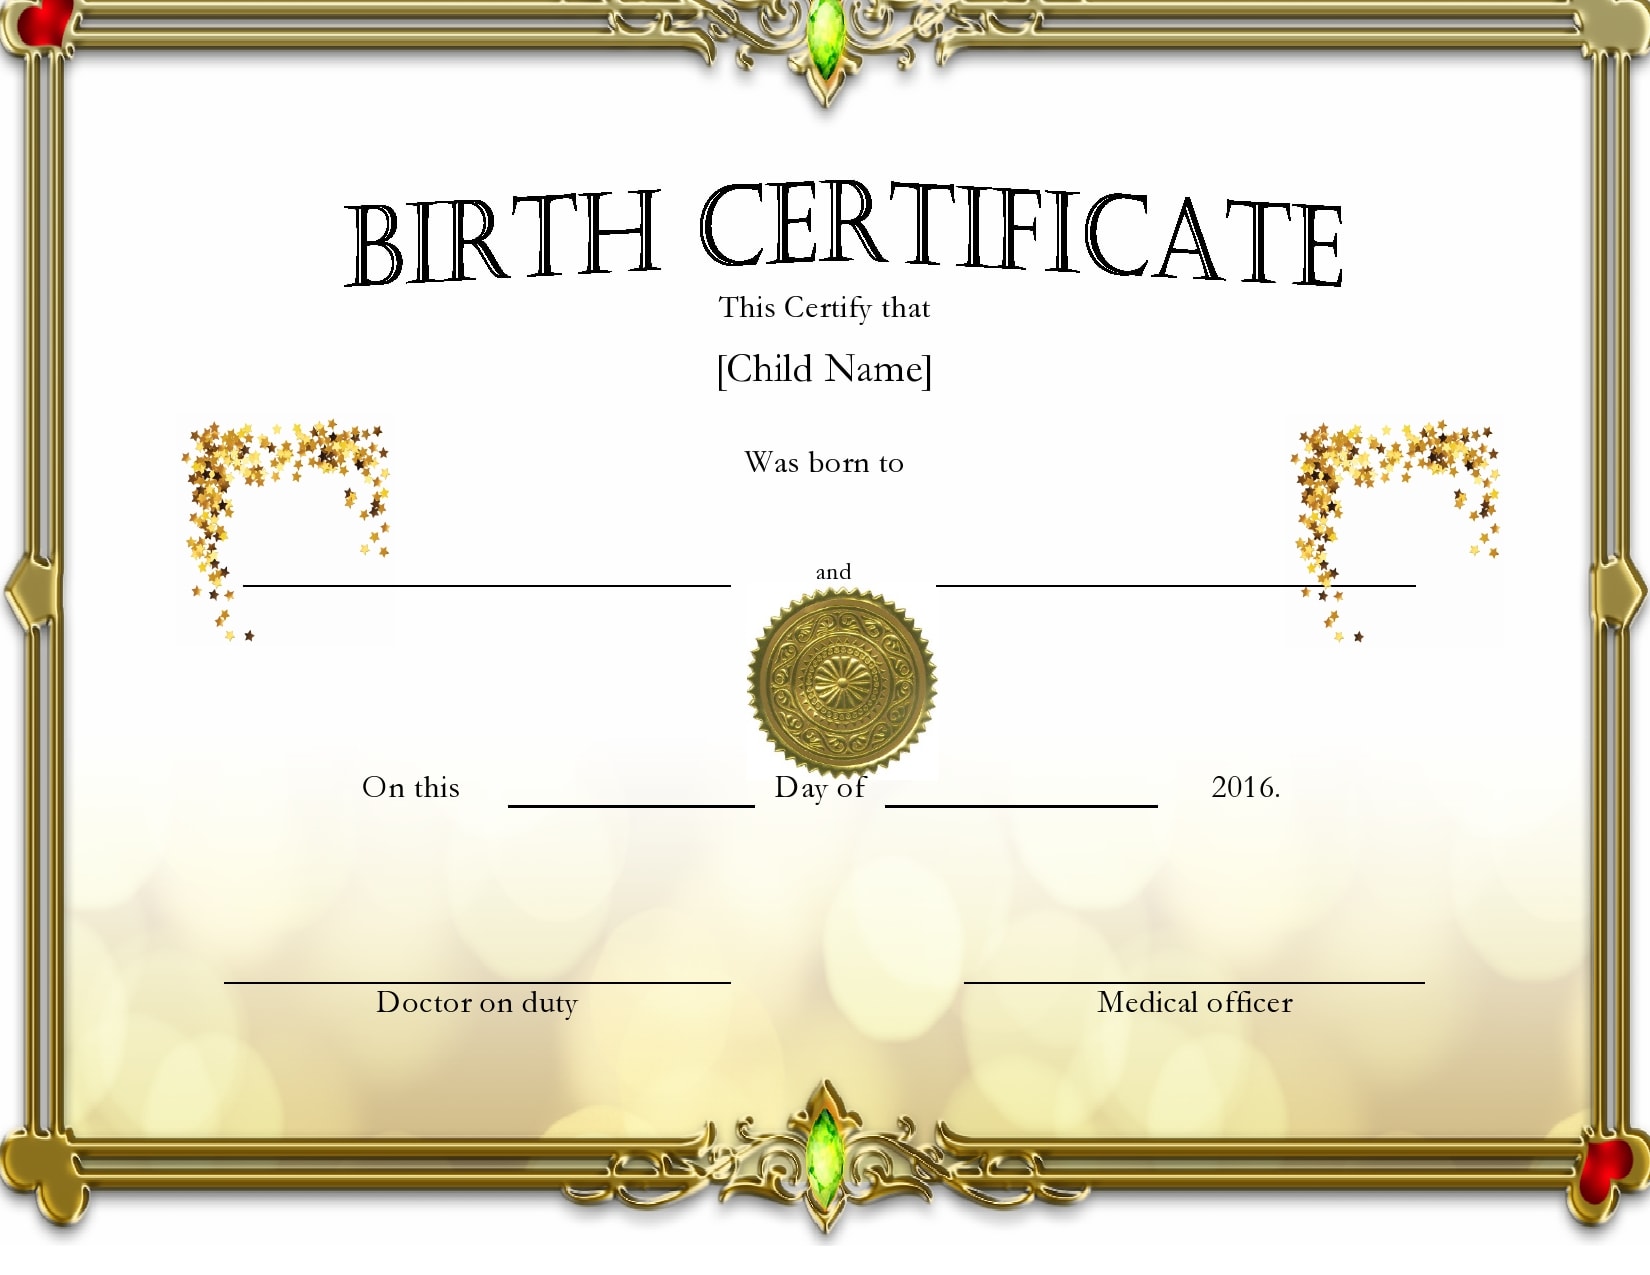 23 Blank Birth Certificate Templates (& Examples) - PrintableTemplates Throughout South African Birth Certificate Template